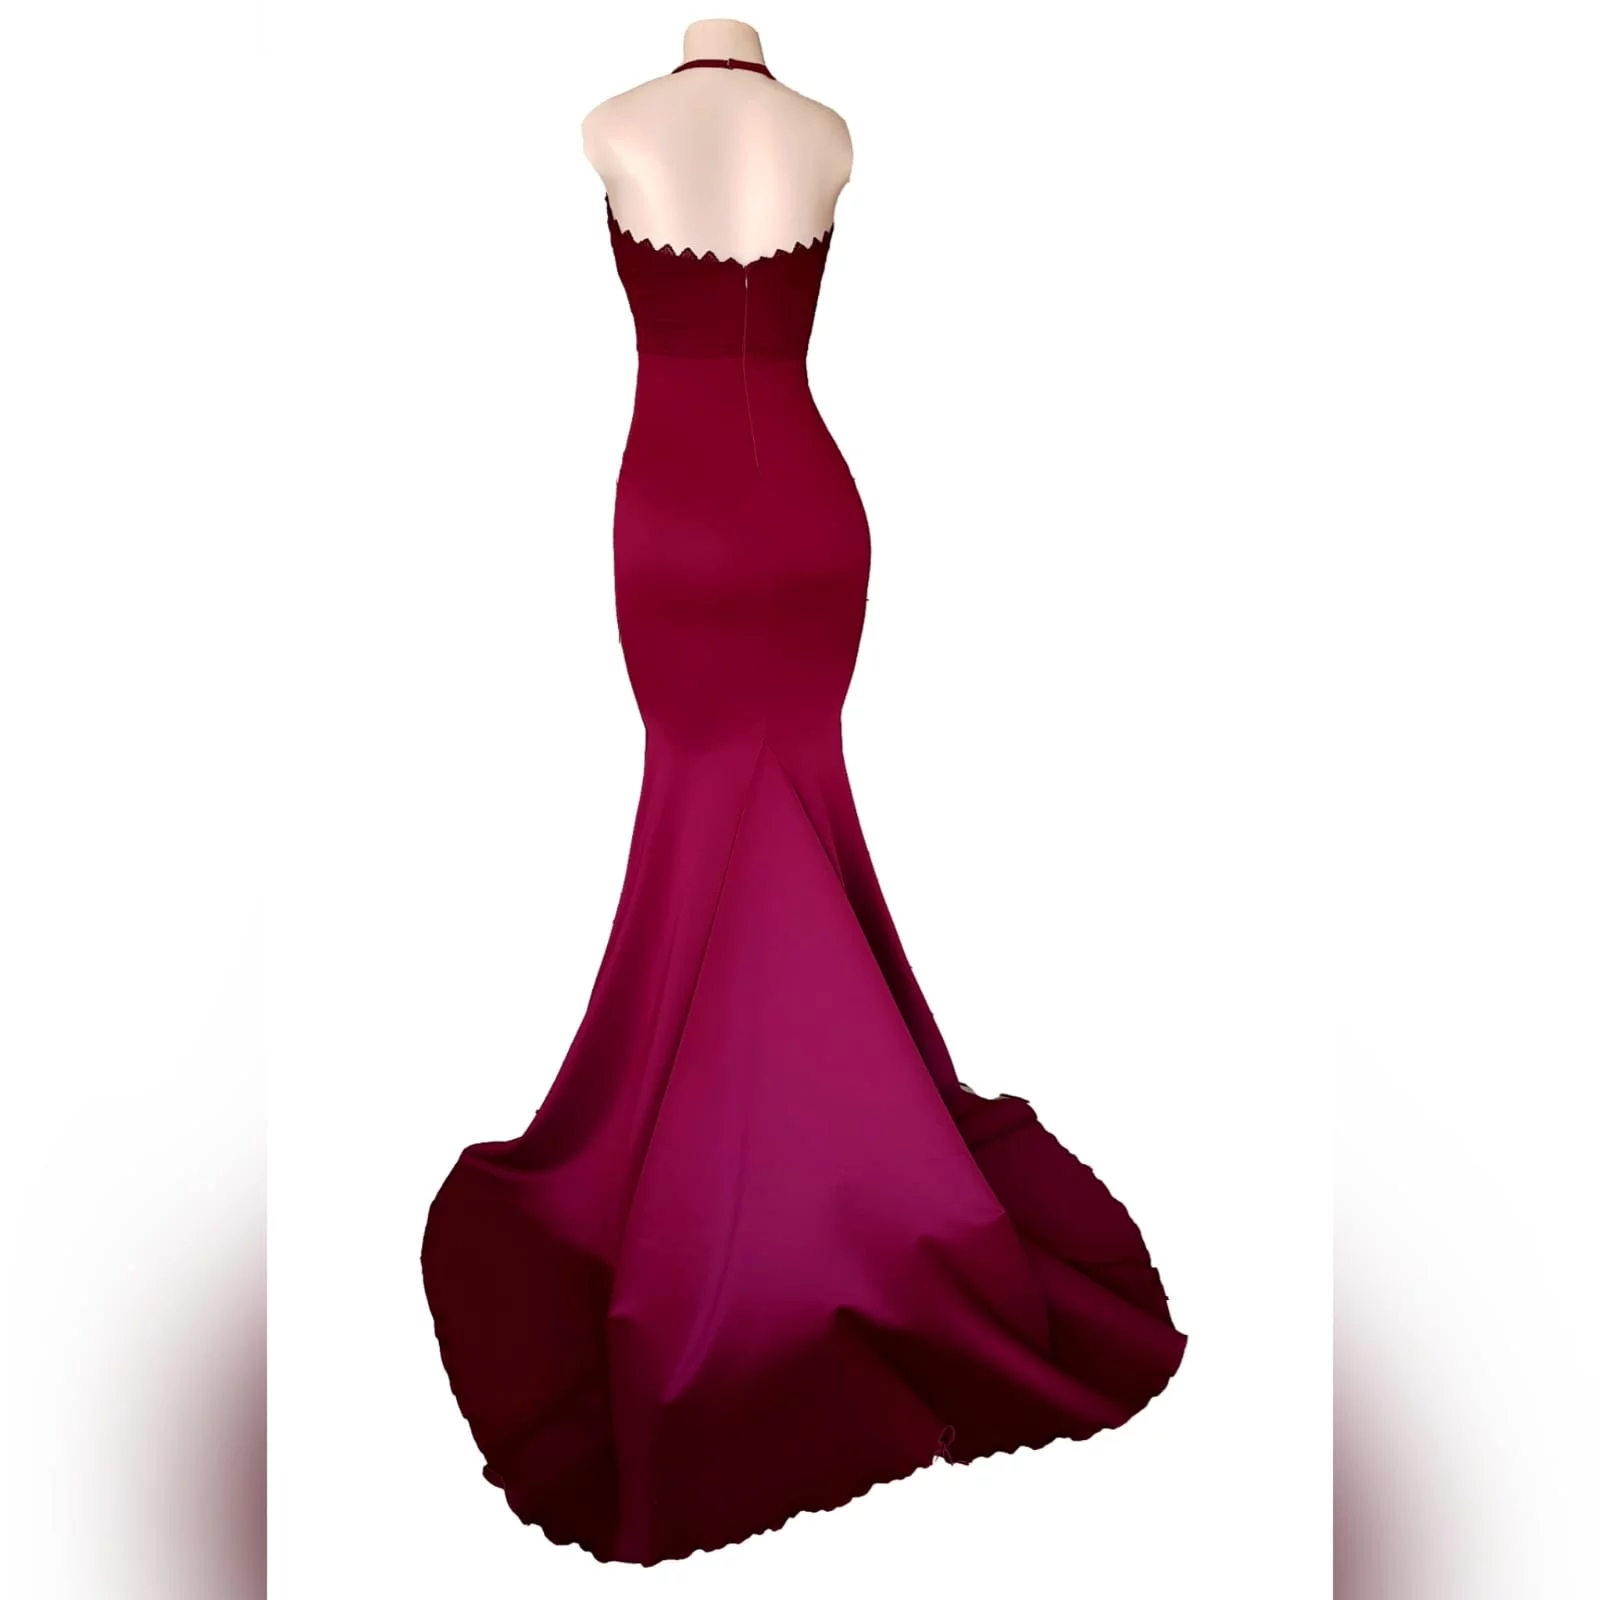 Burgundy soft mermaid gorgeous evening dress 14 this gorgeous evening dress was created for my client in south africa to celebrate her special occasion. A burgundy soft mermaid prom dress with a lace bodice, a sheer lace neckline and dramatic train.